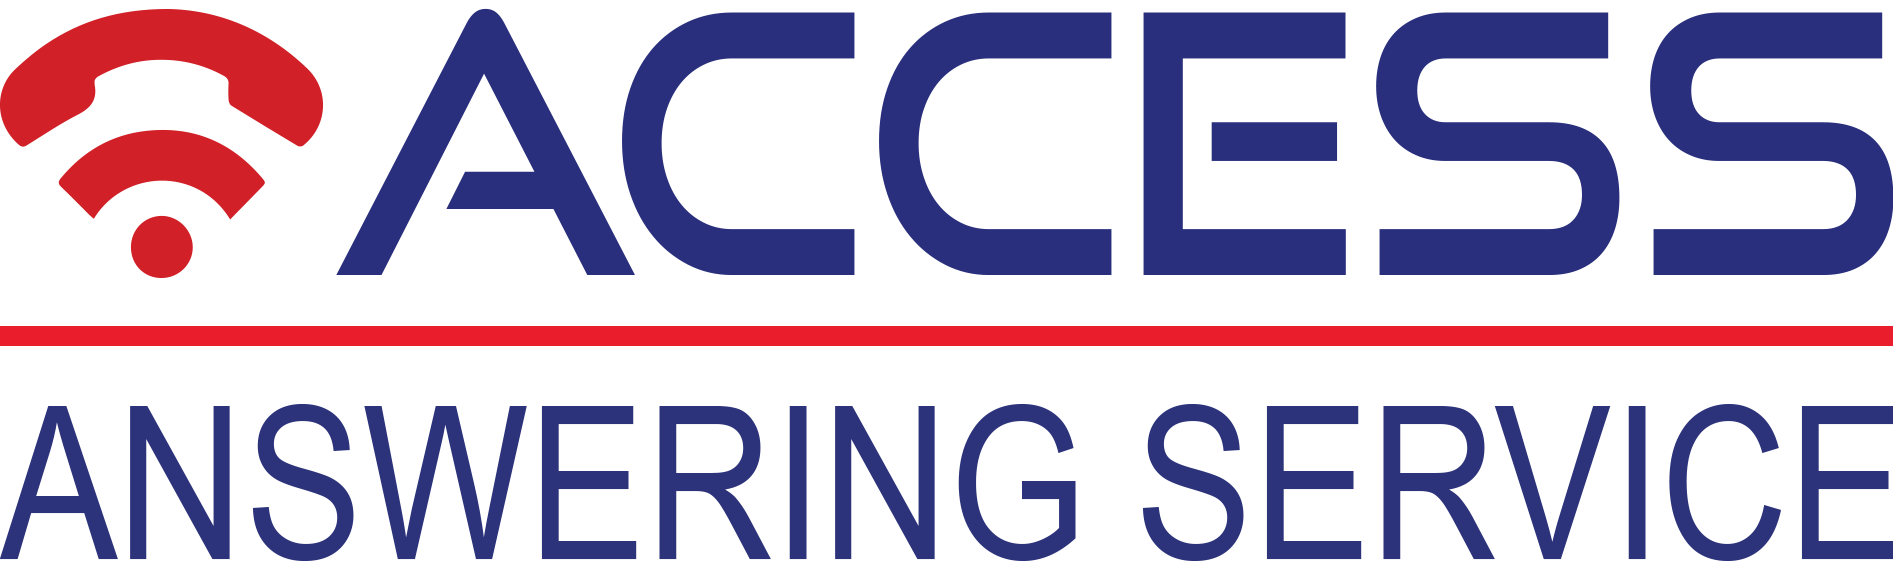 Access Answering Service